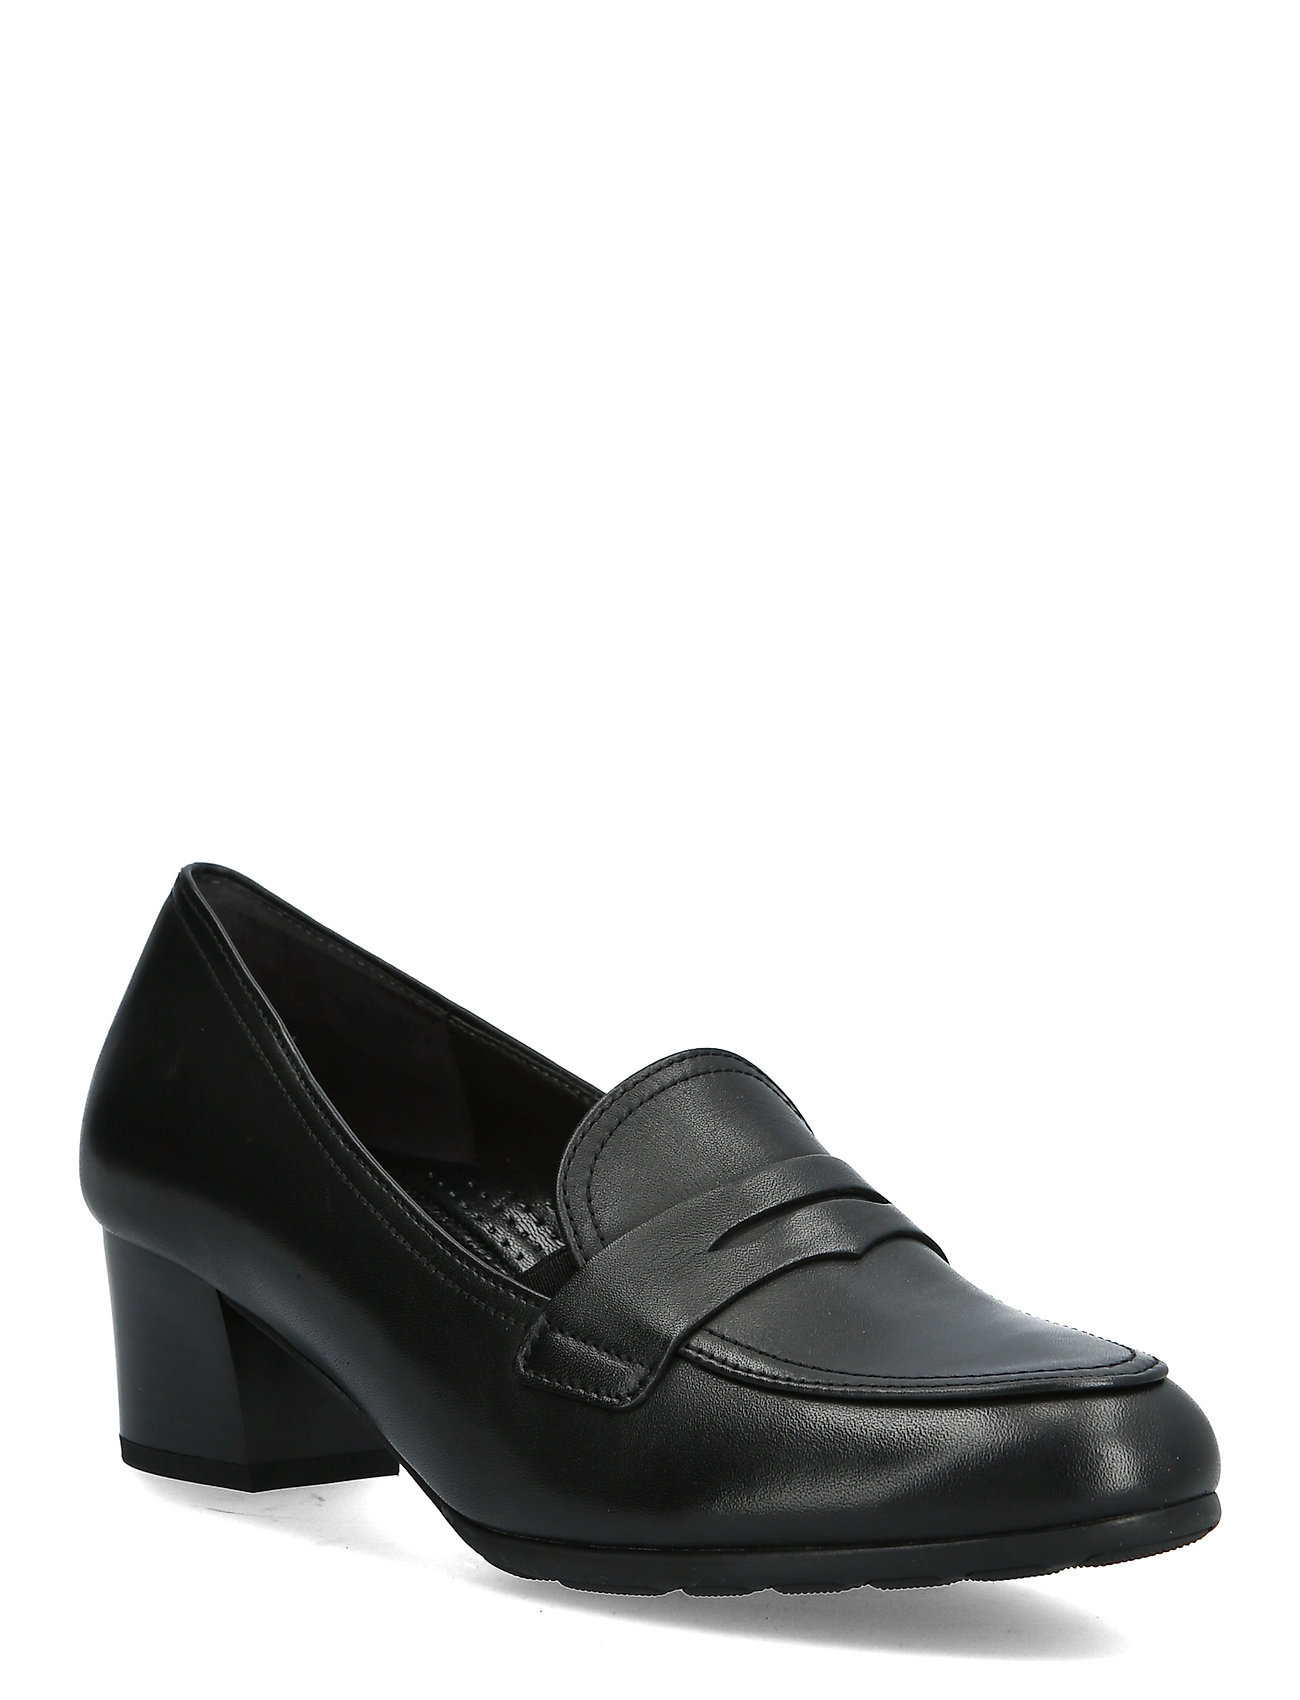 Loafer Shoes Heels Pumps Classic Musta Gabor